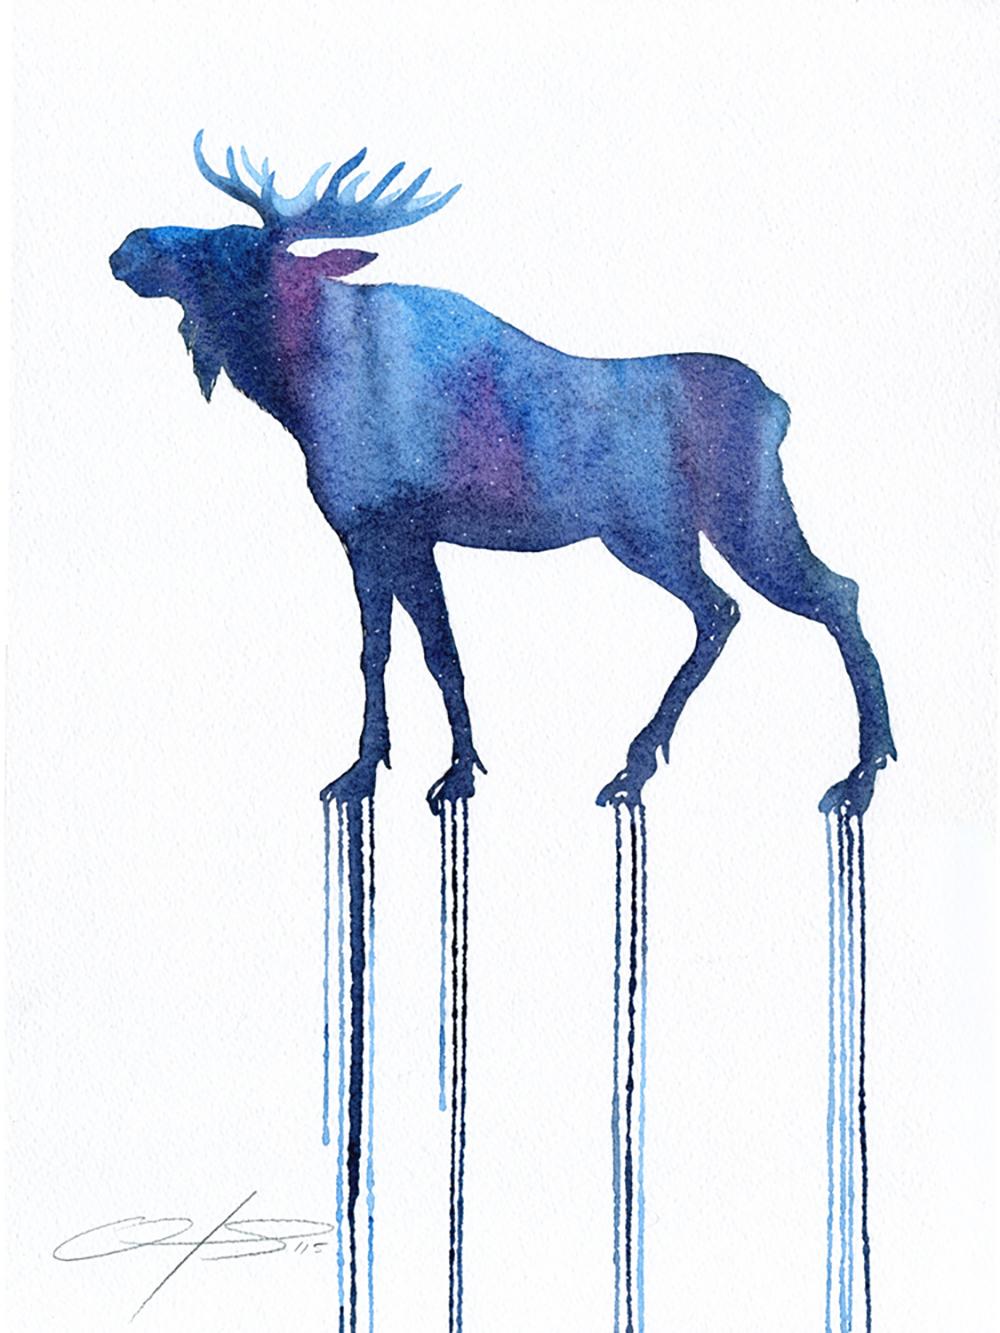 Oliver Flores Animal Painting - "Constellation Moose", watercolor & pencil blue moose on watercolor paper